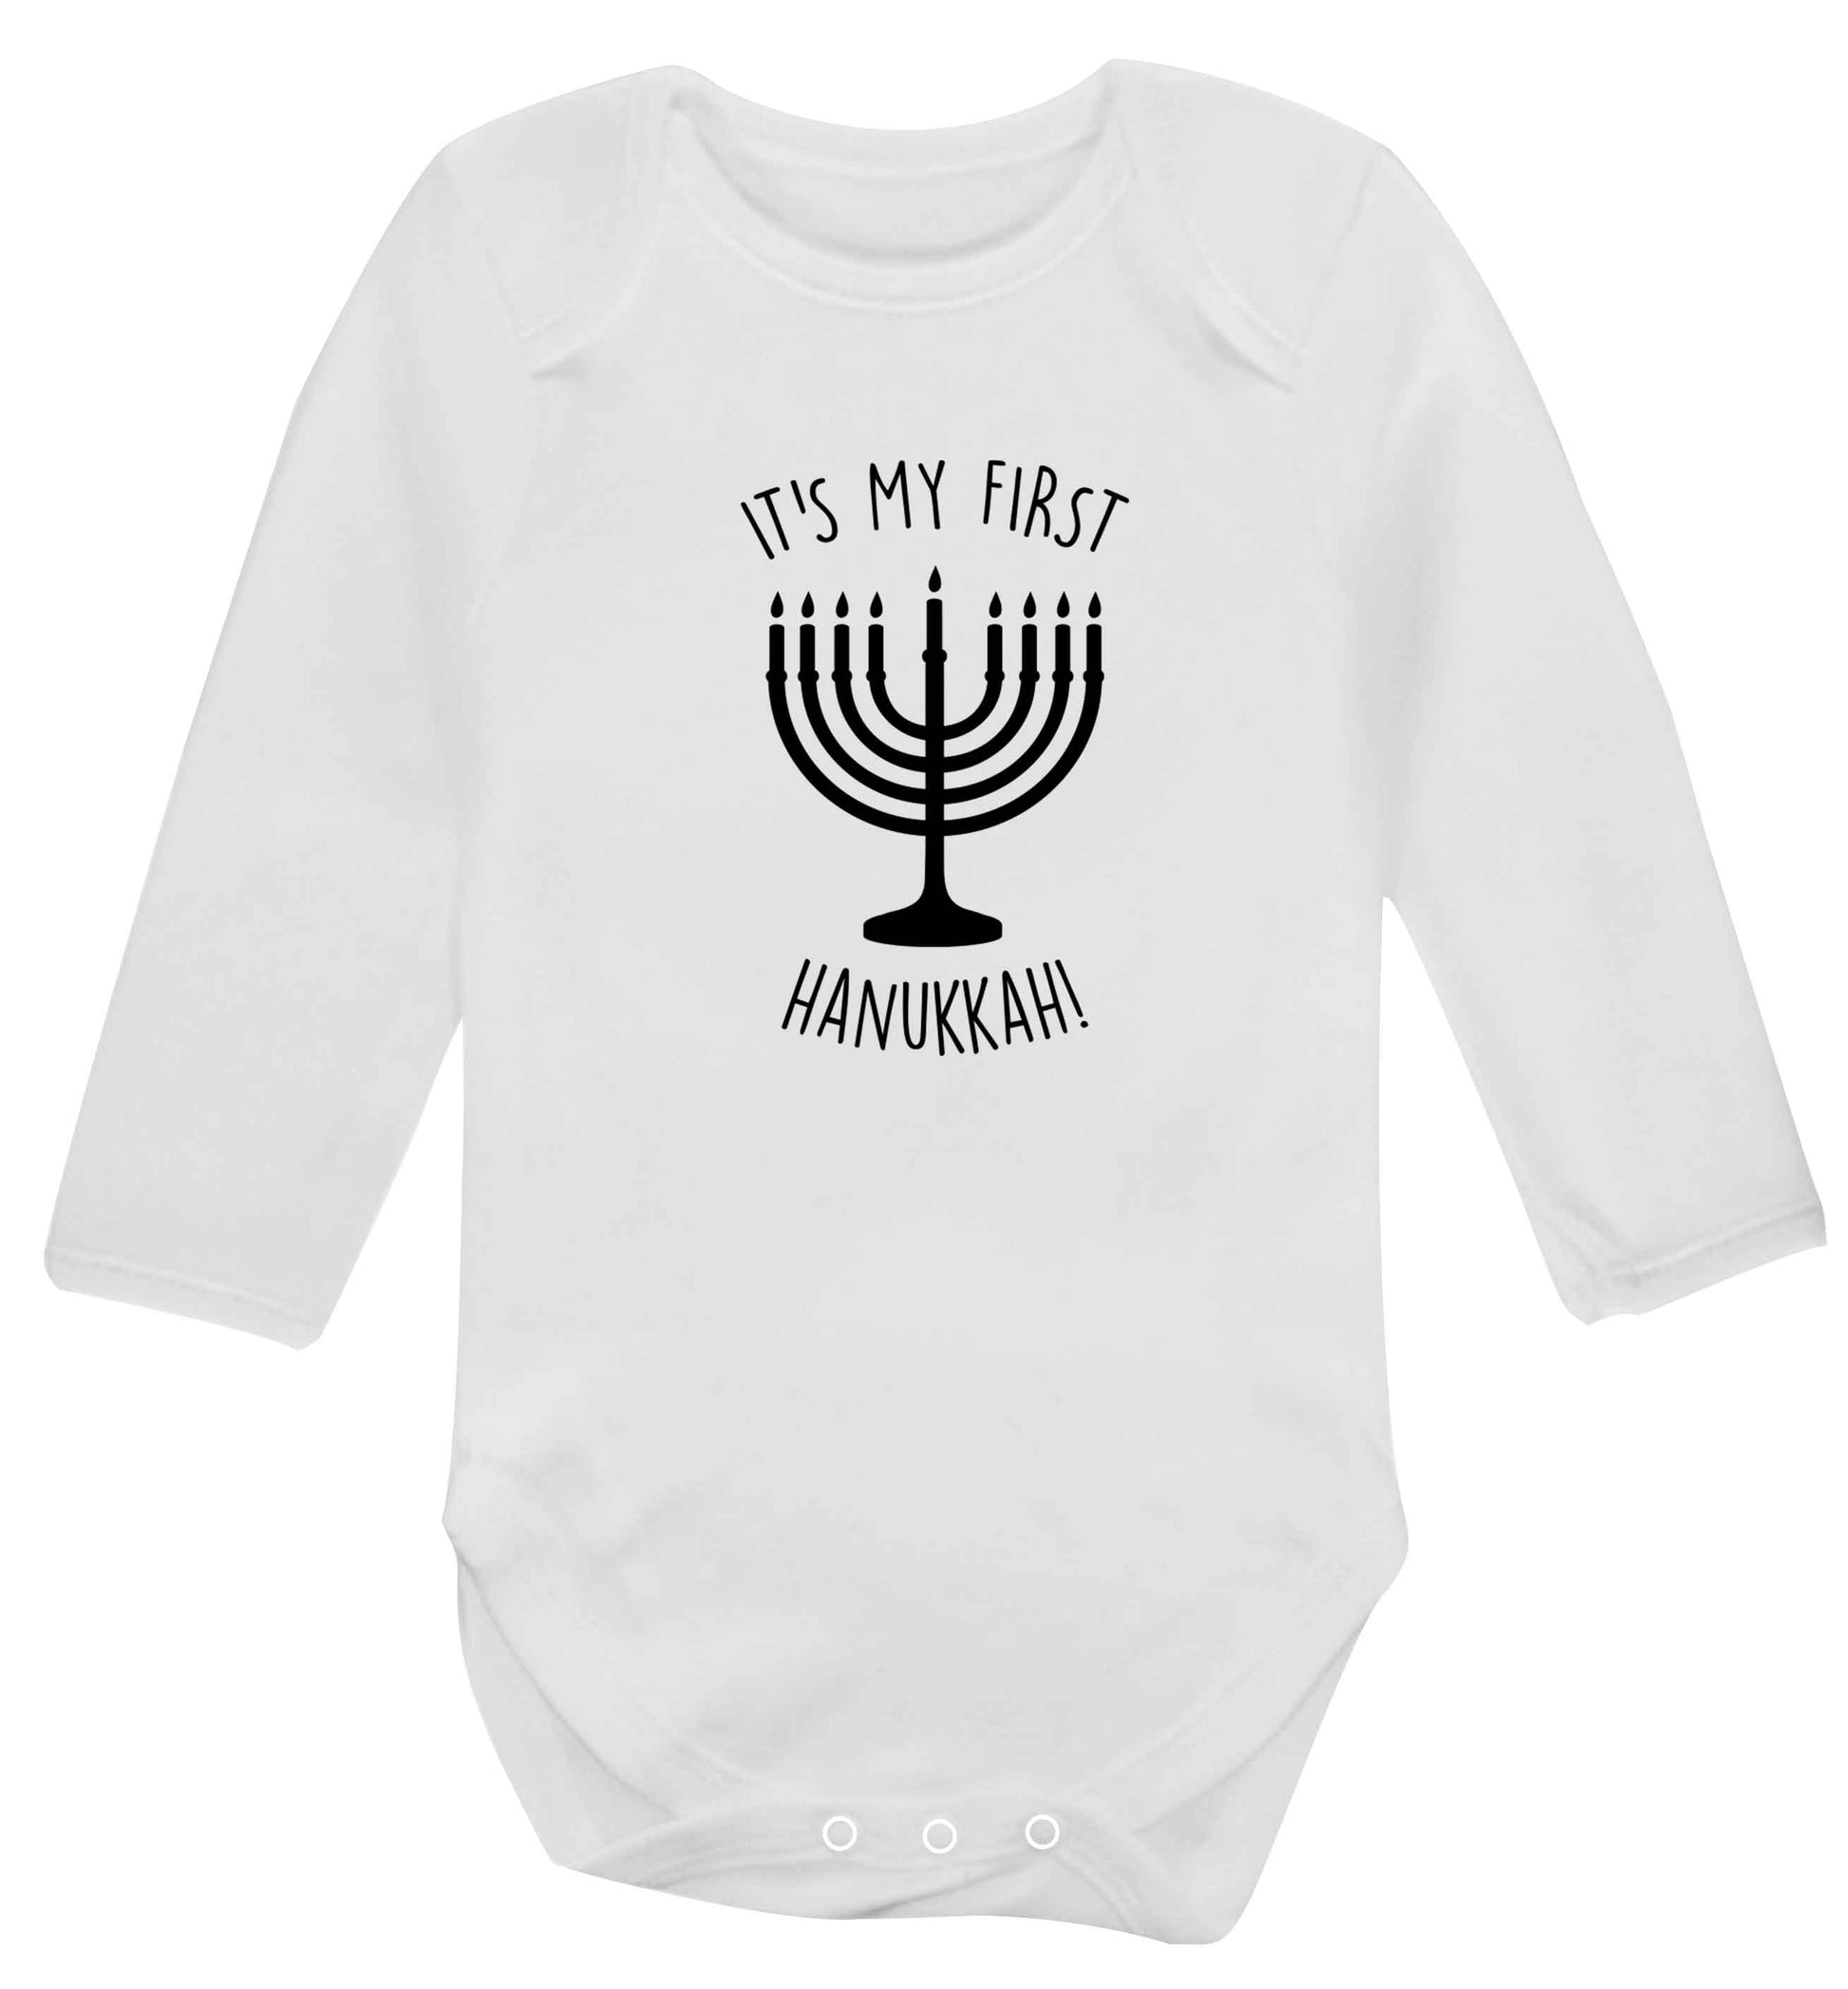 It's my first hanukkah baby vest long sleeved white 6-12 months